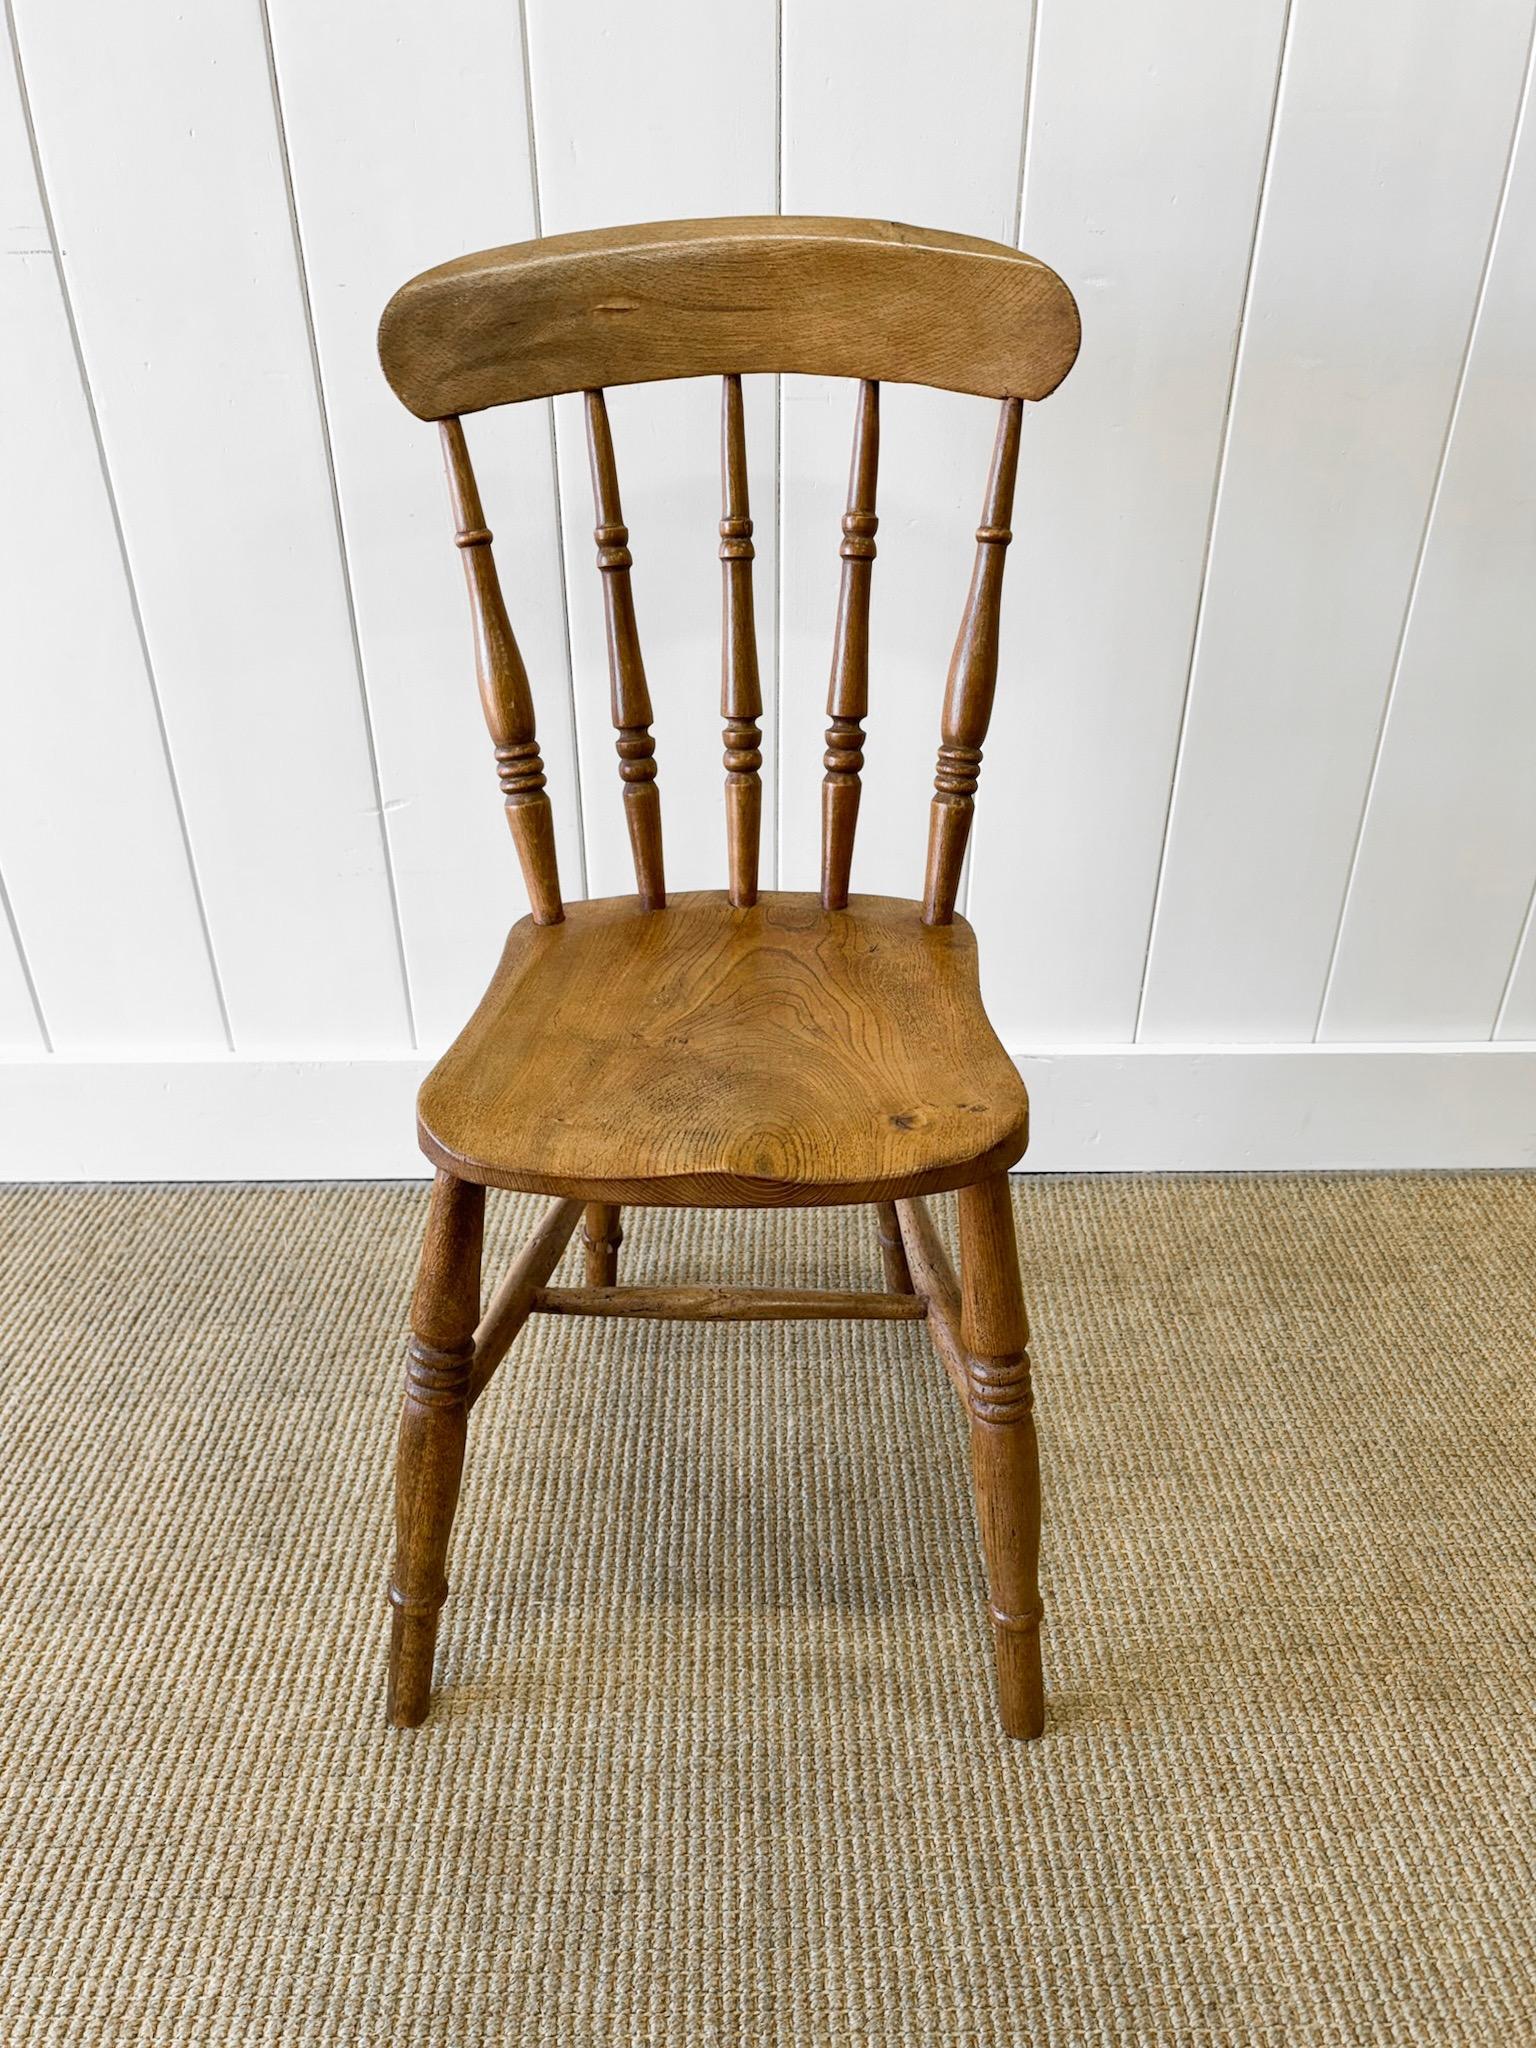 An Antique Set of 4 Spindle Back Chairs In Good Condition For Sale In Oak Park, MI